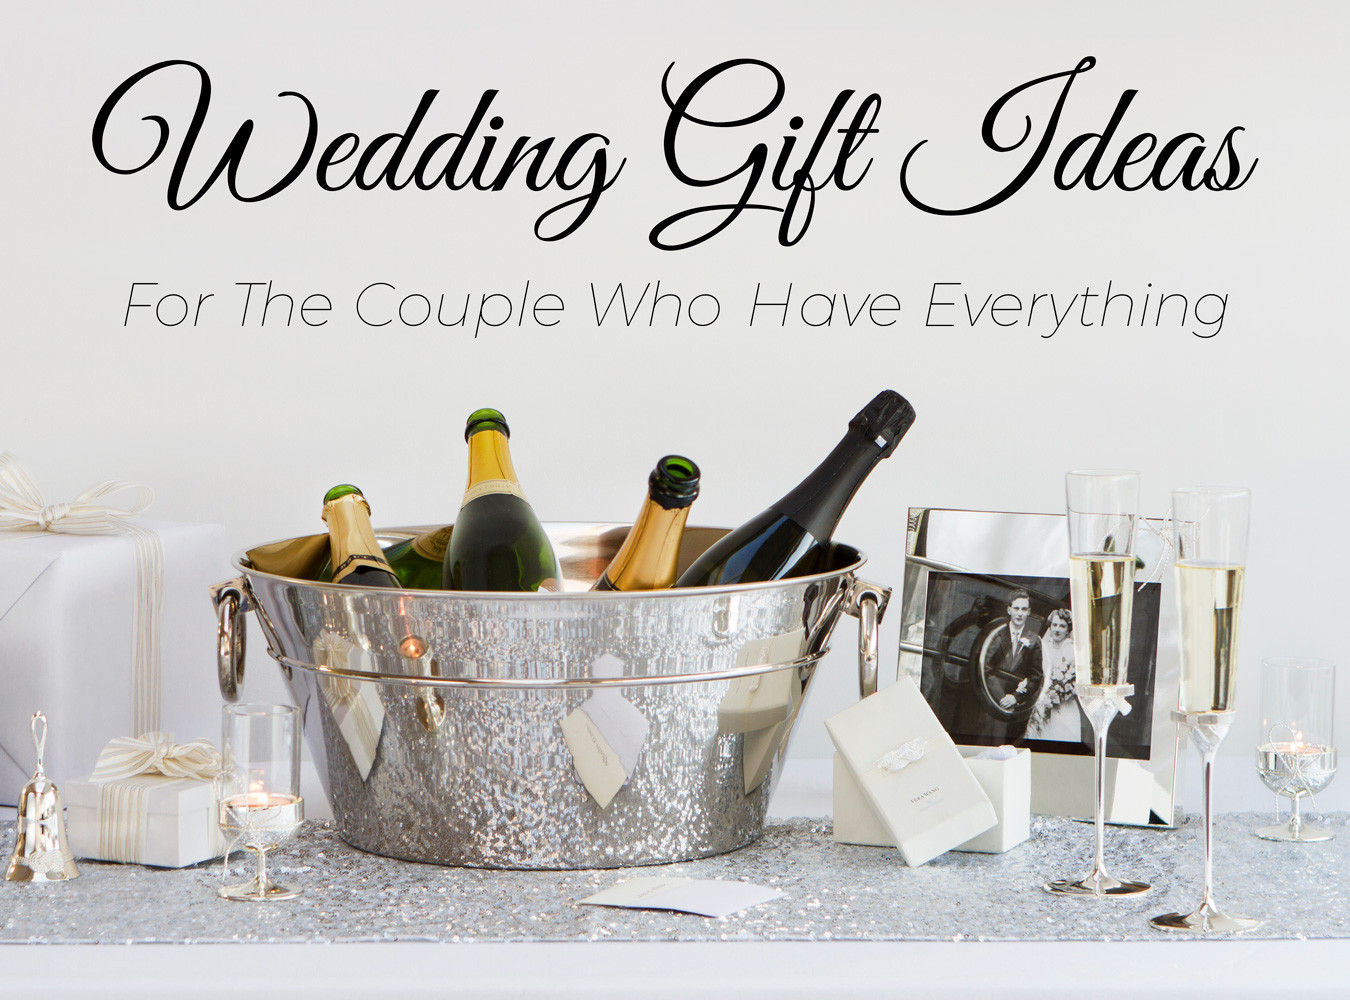 Gift Ideas For Wedding Couple
 5 Wedding Gift Ideas for the Couple Who Have Everything